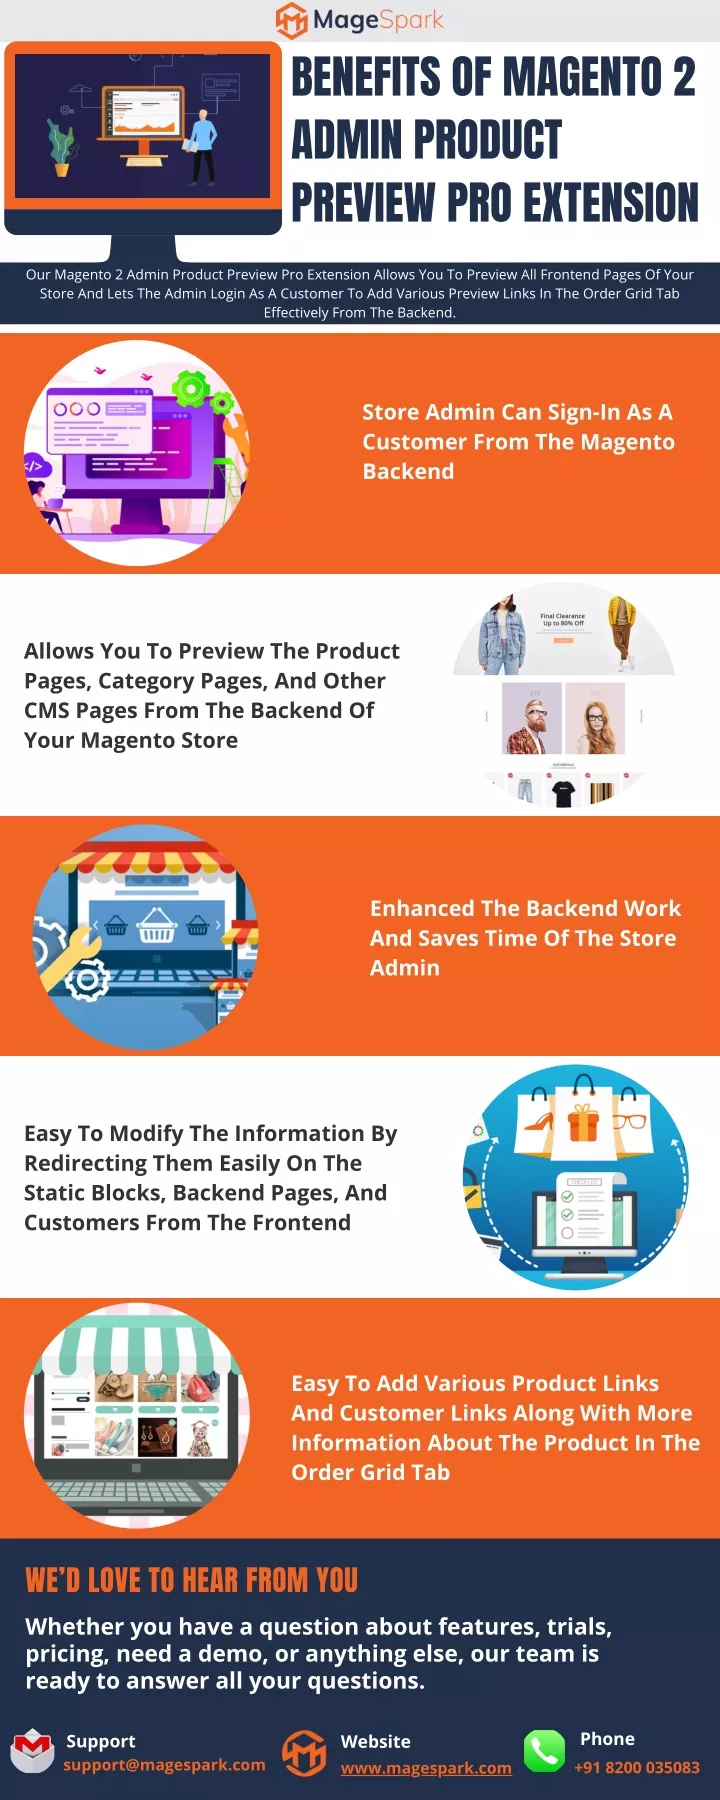 benefits of magento 2 admin product preview